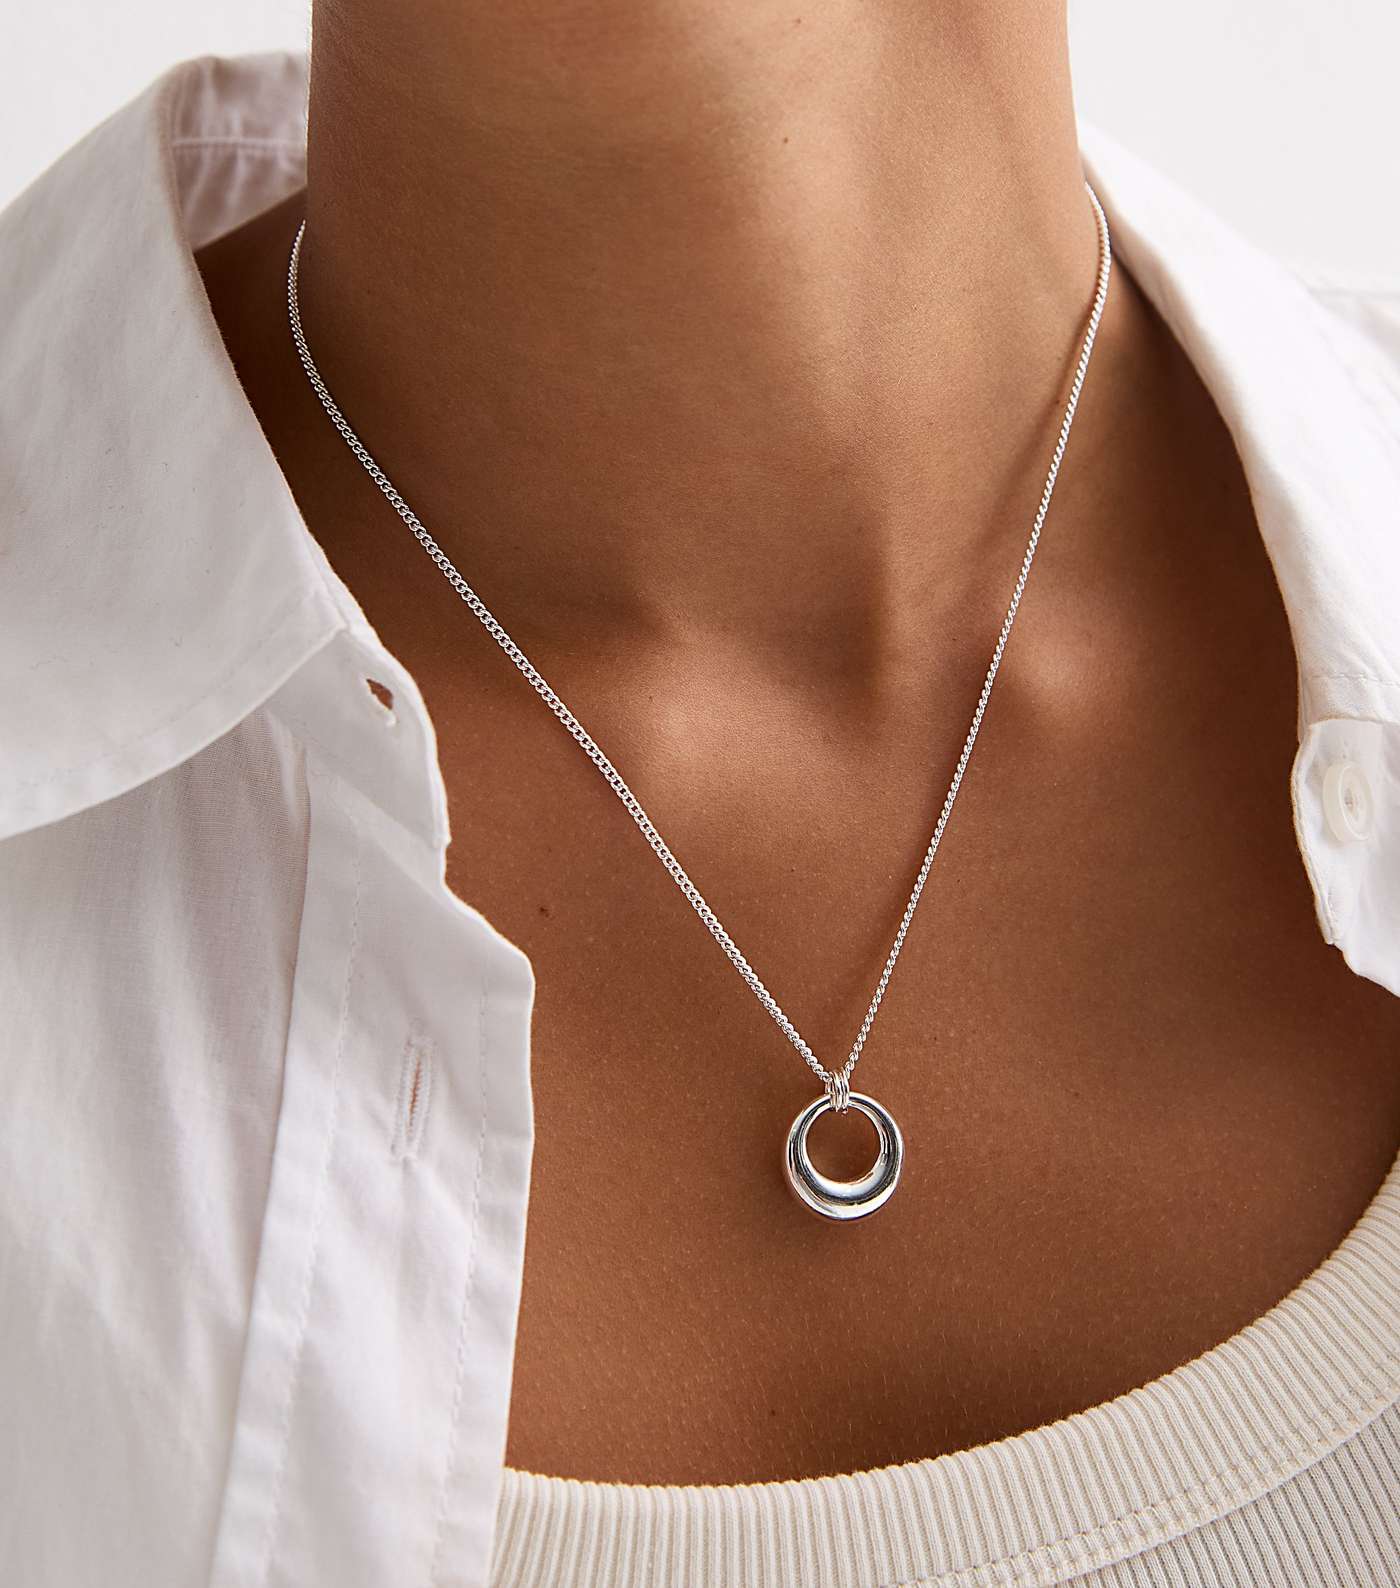 Silver Tapered Open Circle Pendant Necklace